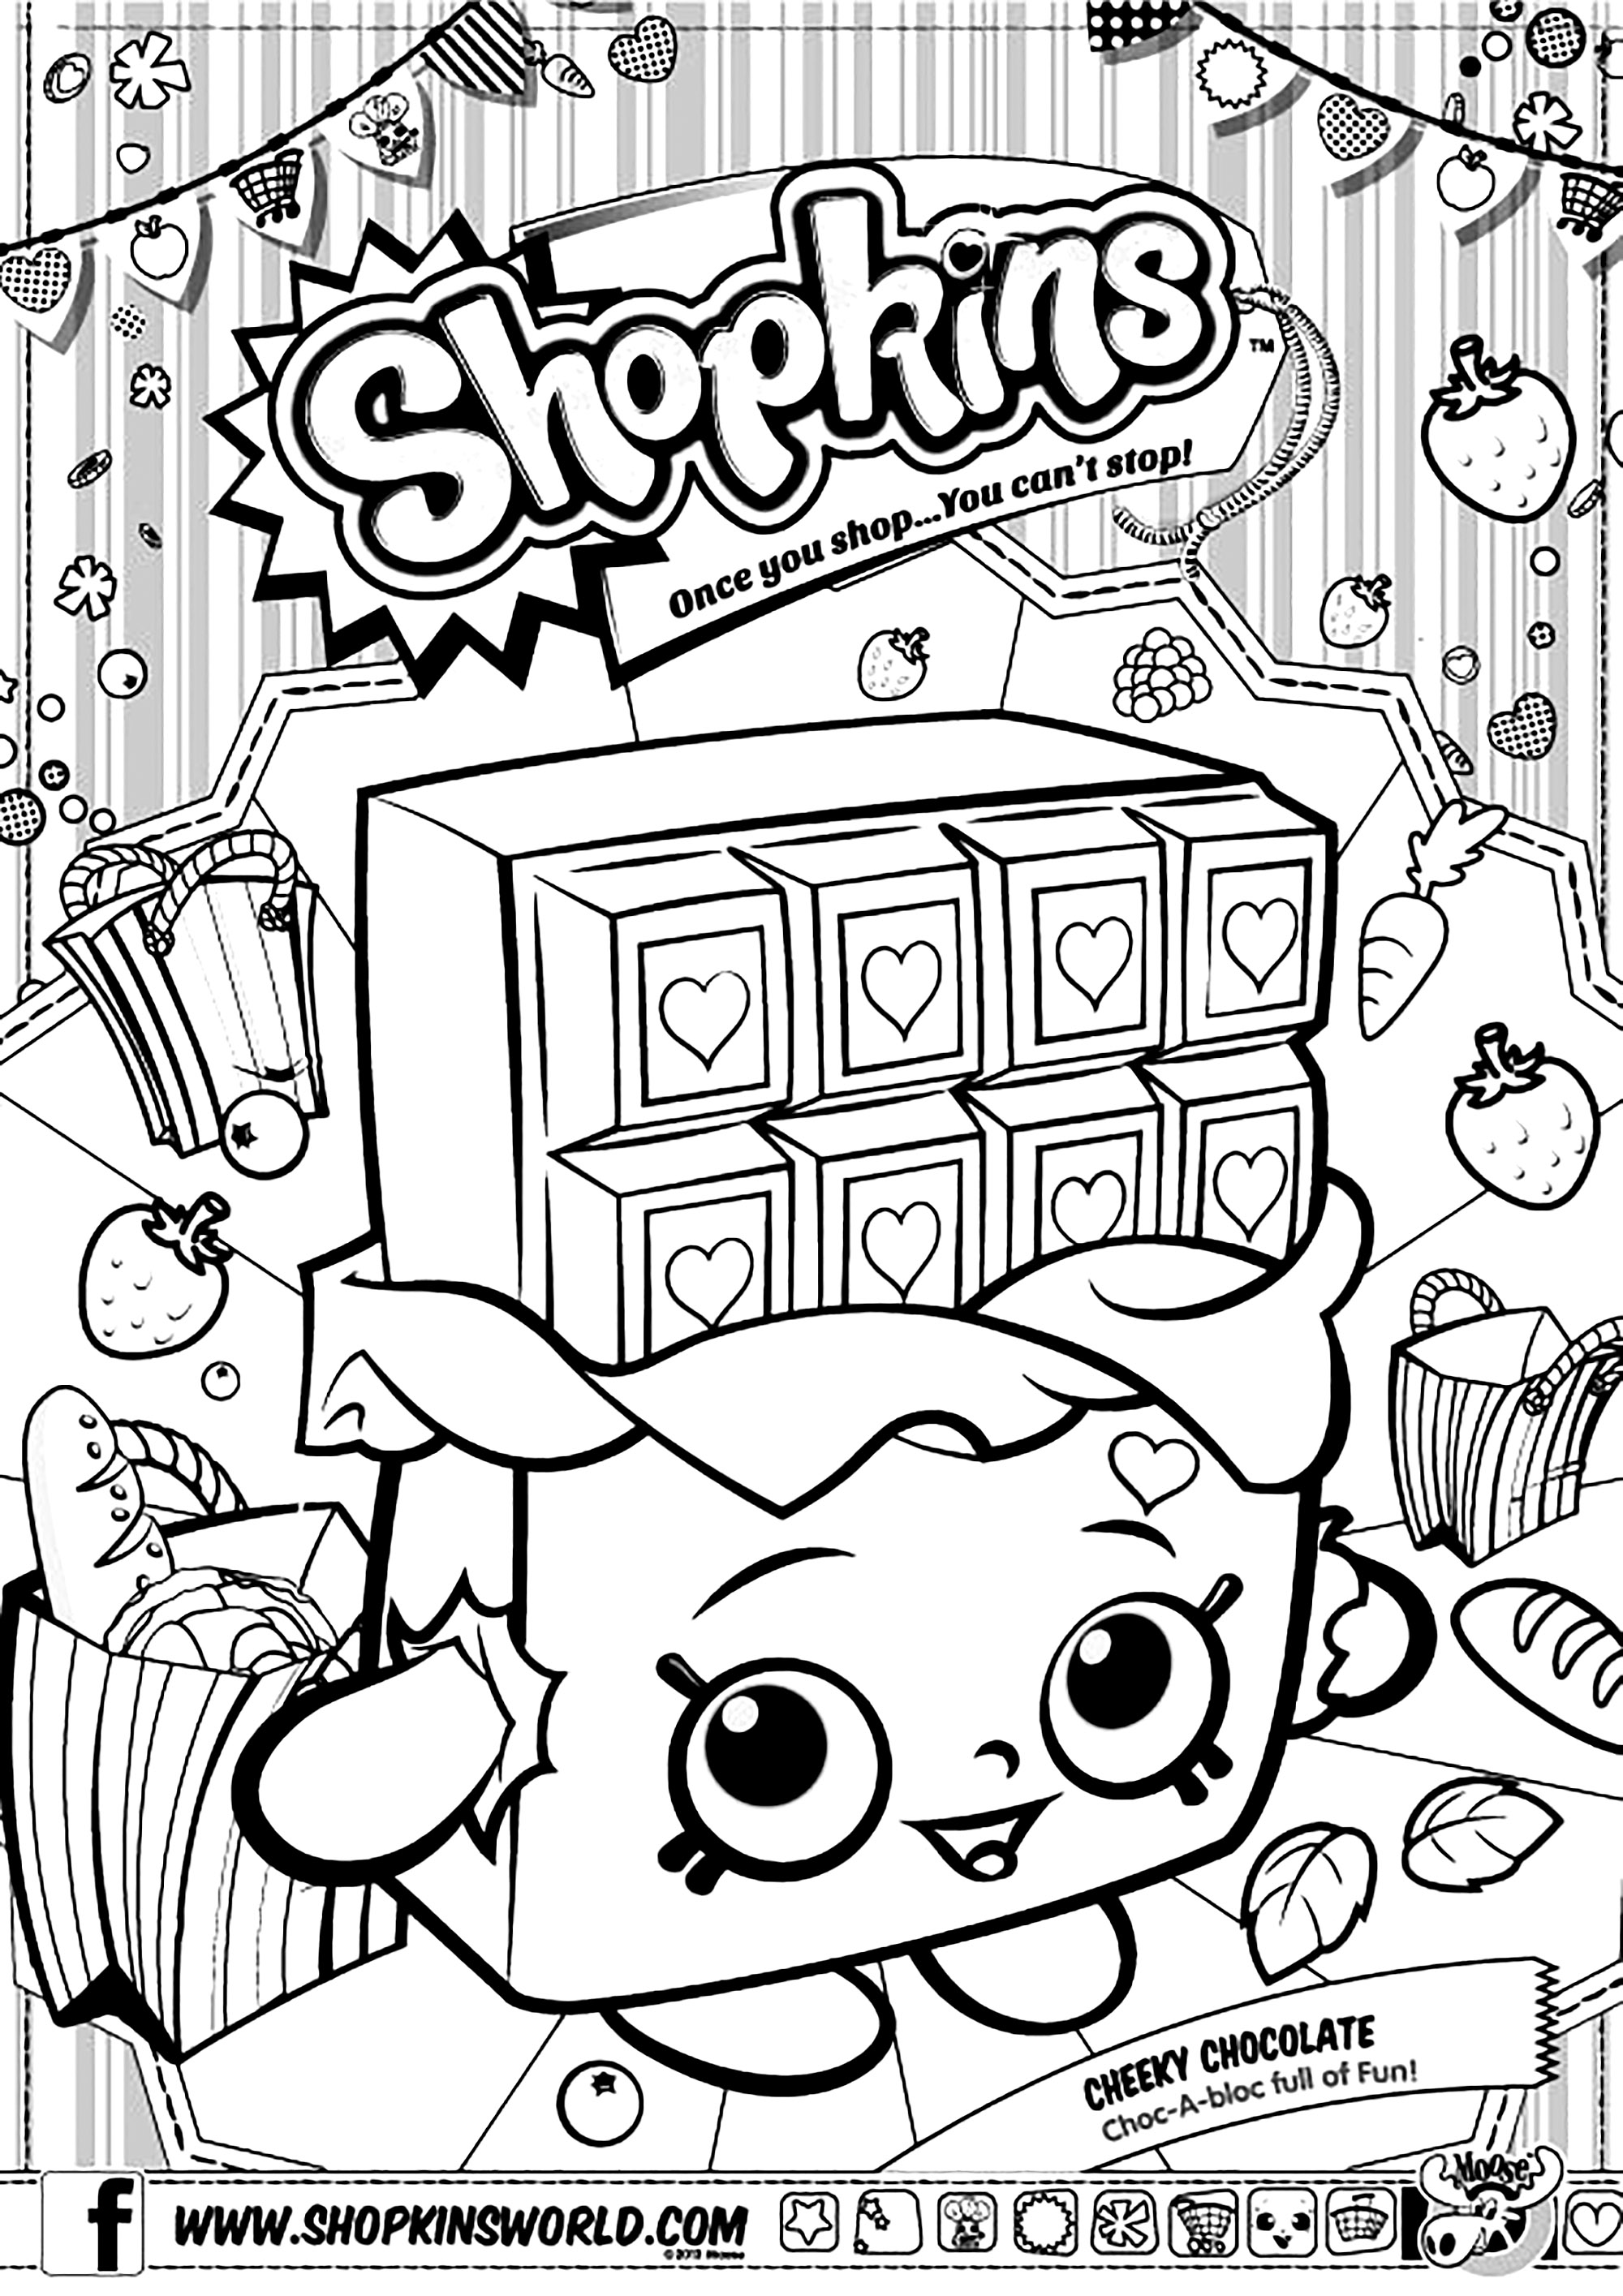 Funny Shopkins coloring page for children